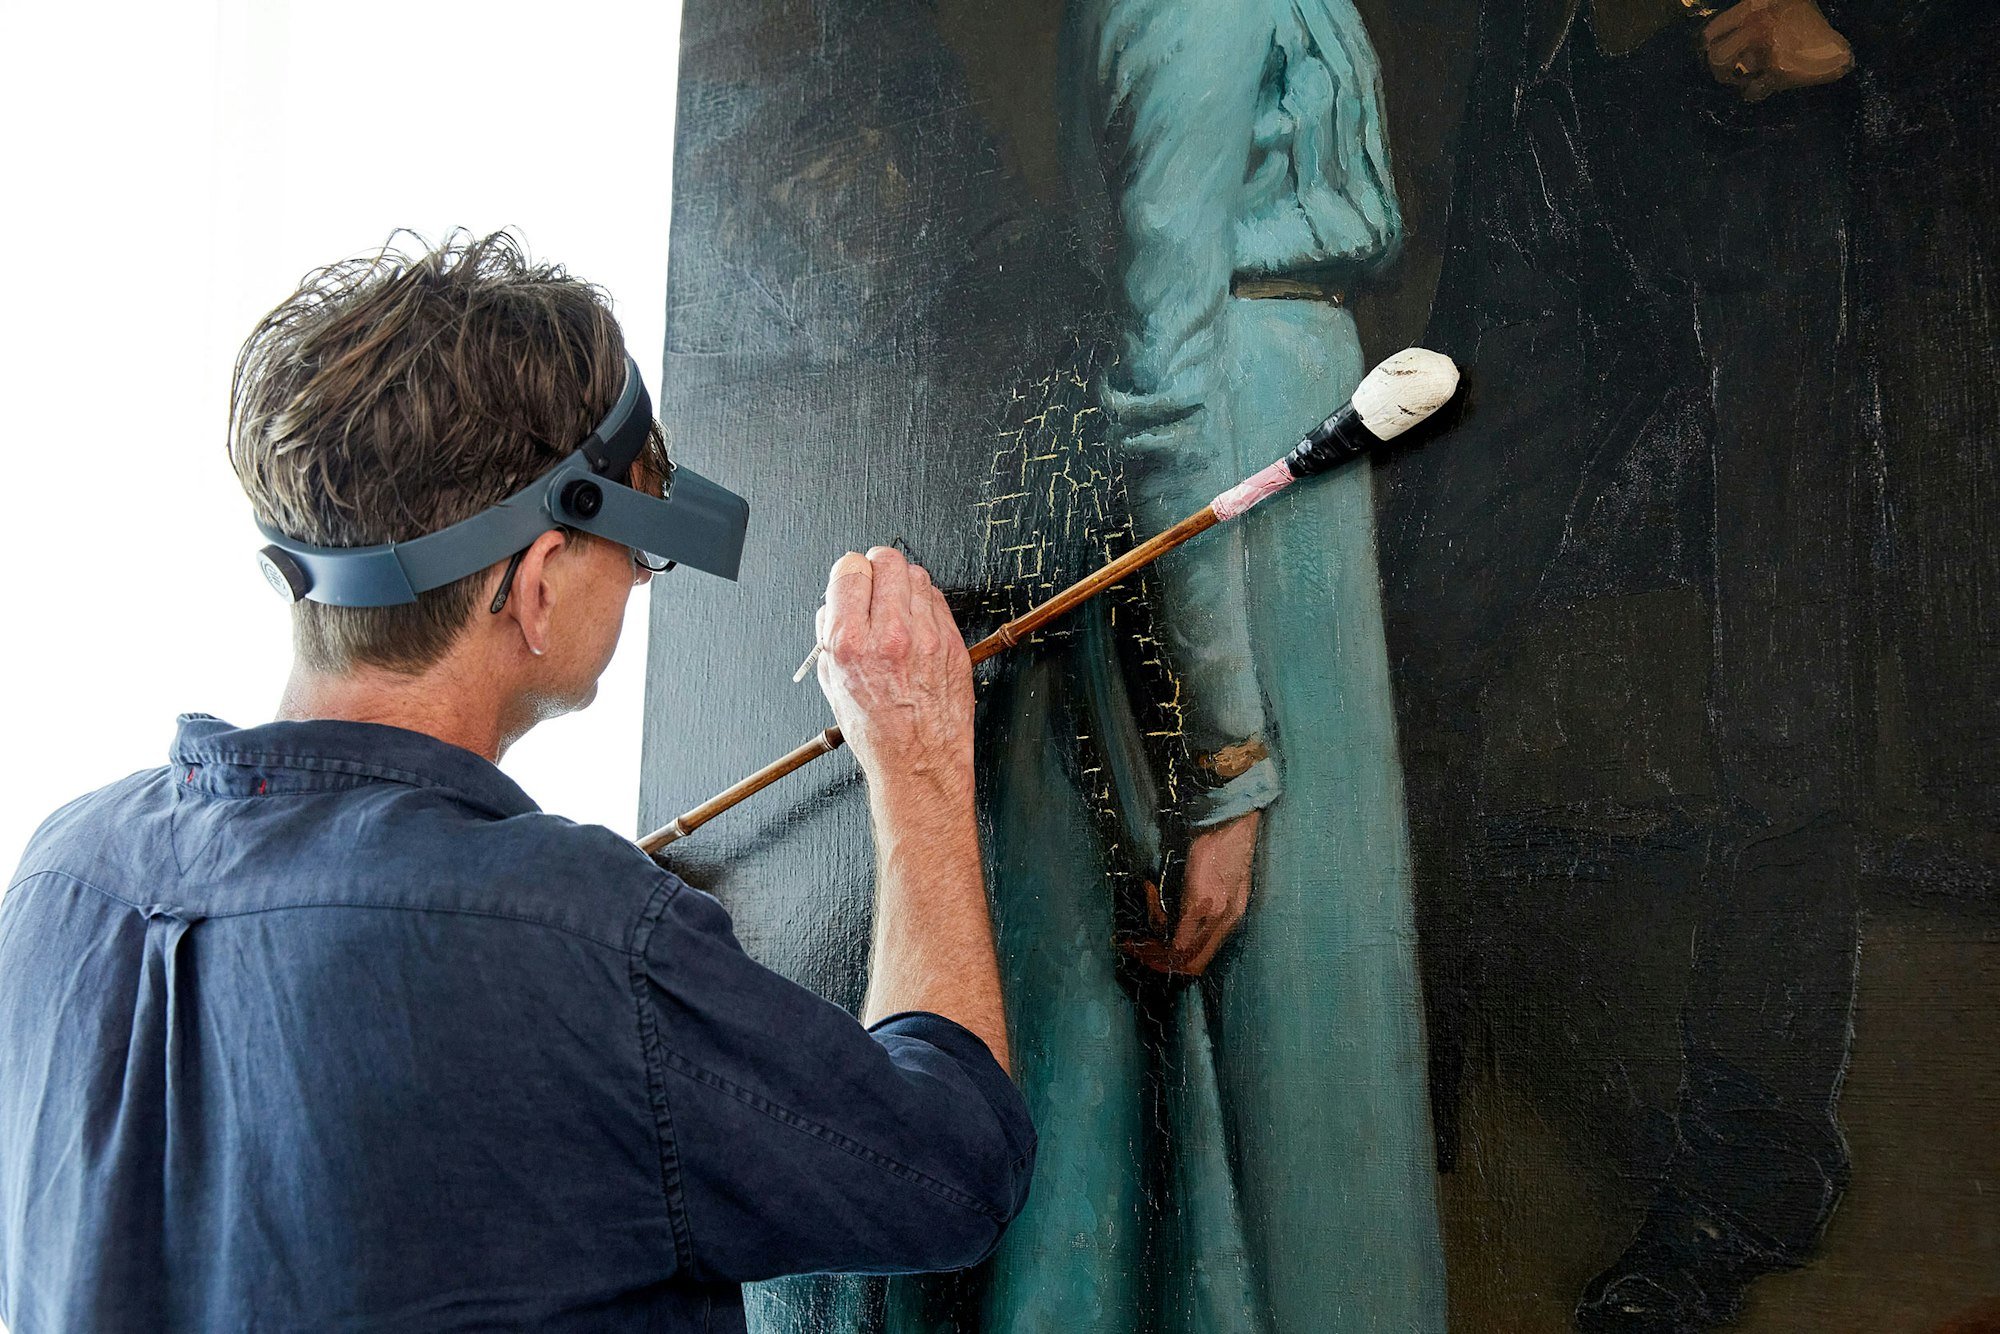 Hugh Ramsay's The blue dress mid-conservation treatment in the conservation laboratory at the Art Gallery of New South Wales